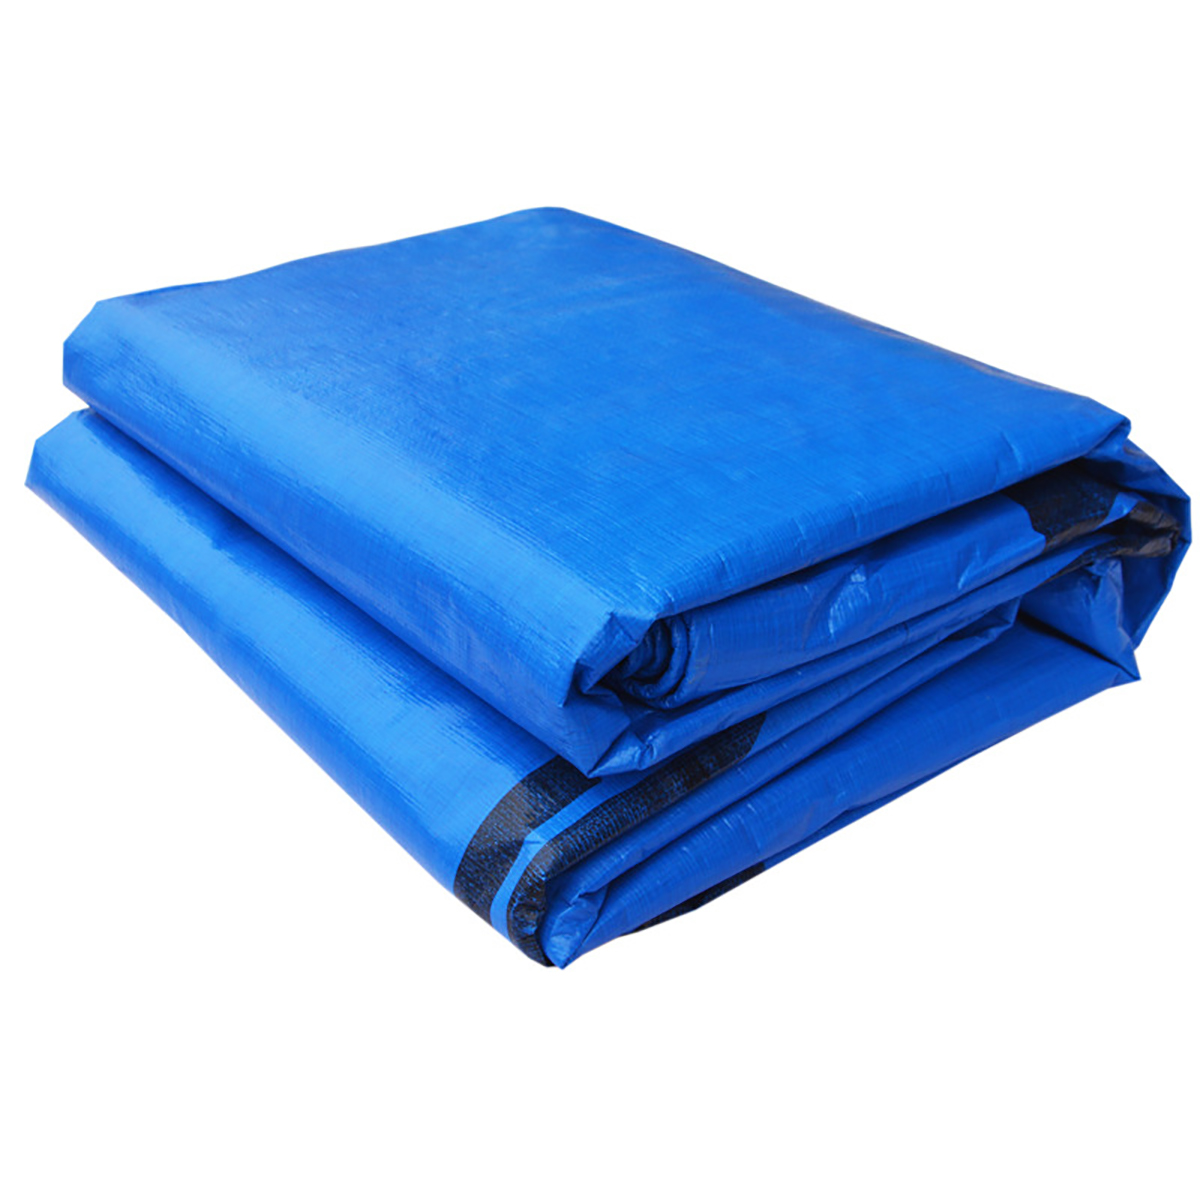 Swimming-Pool-Square-Ground-Cloth-Cover-Dustproof-Waterproof-Anti-ultraviolet-Outdoor-Protection-Flo-1956594-4